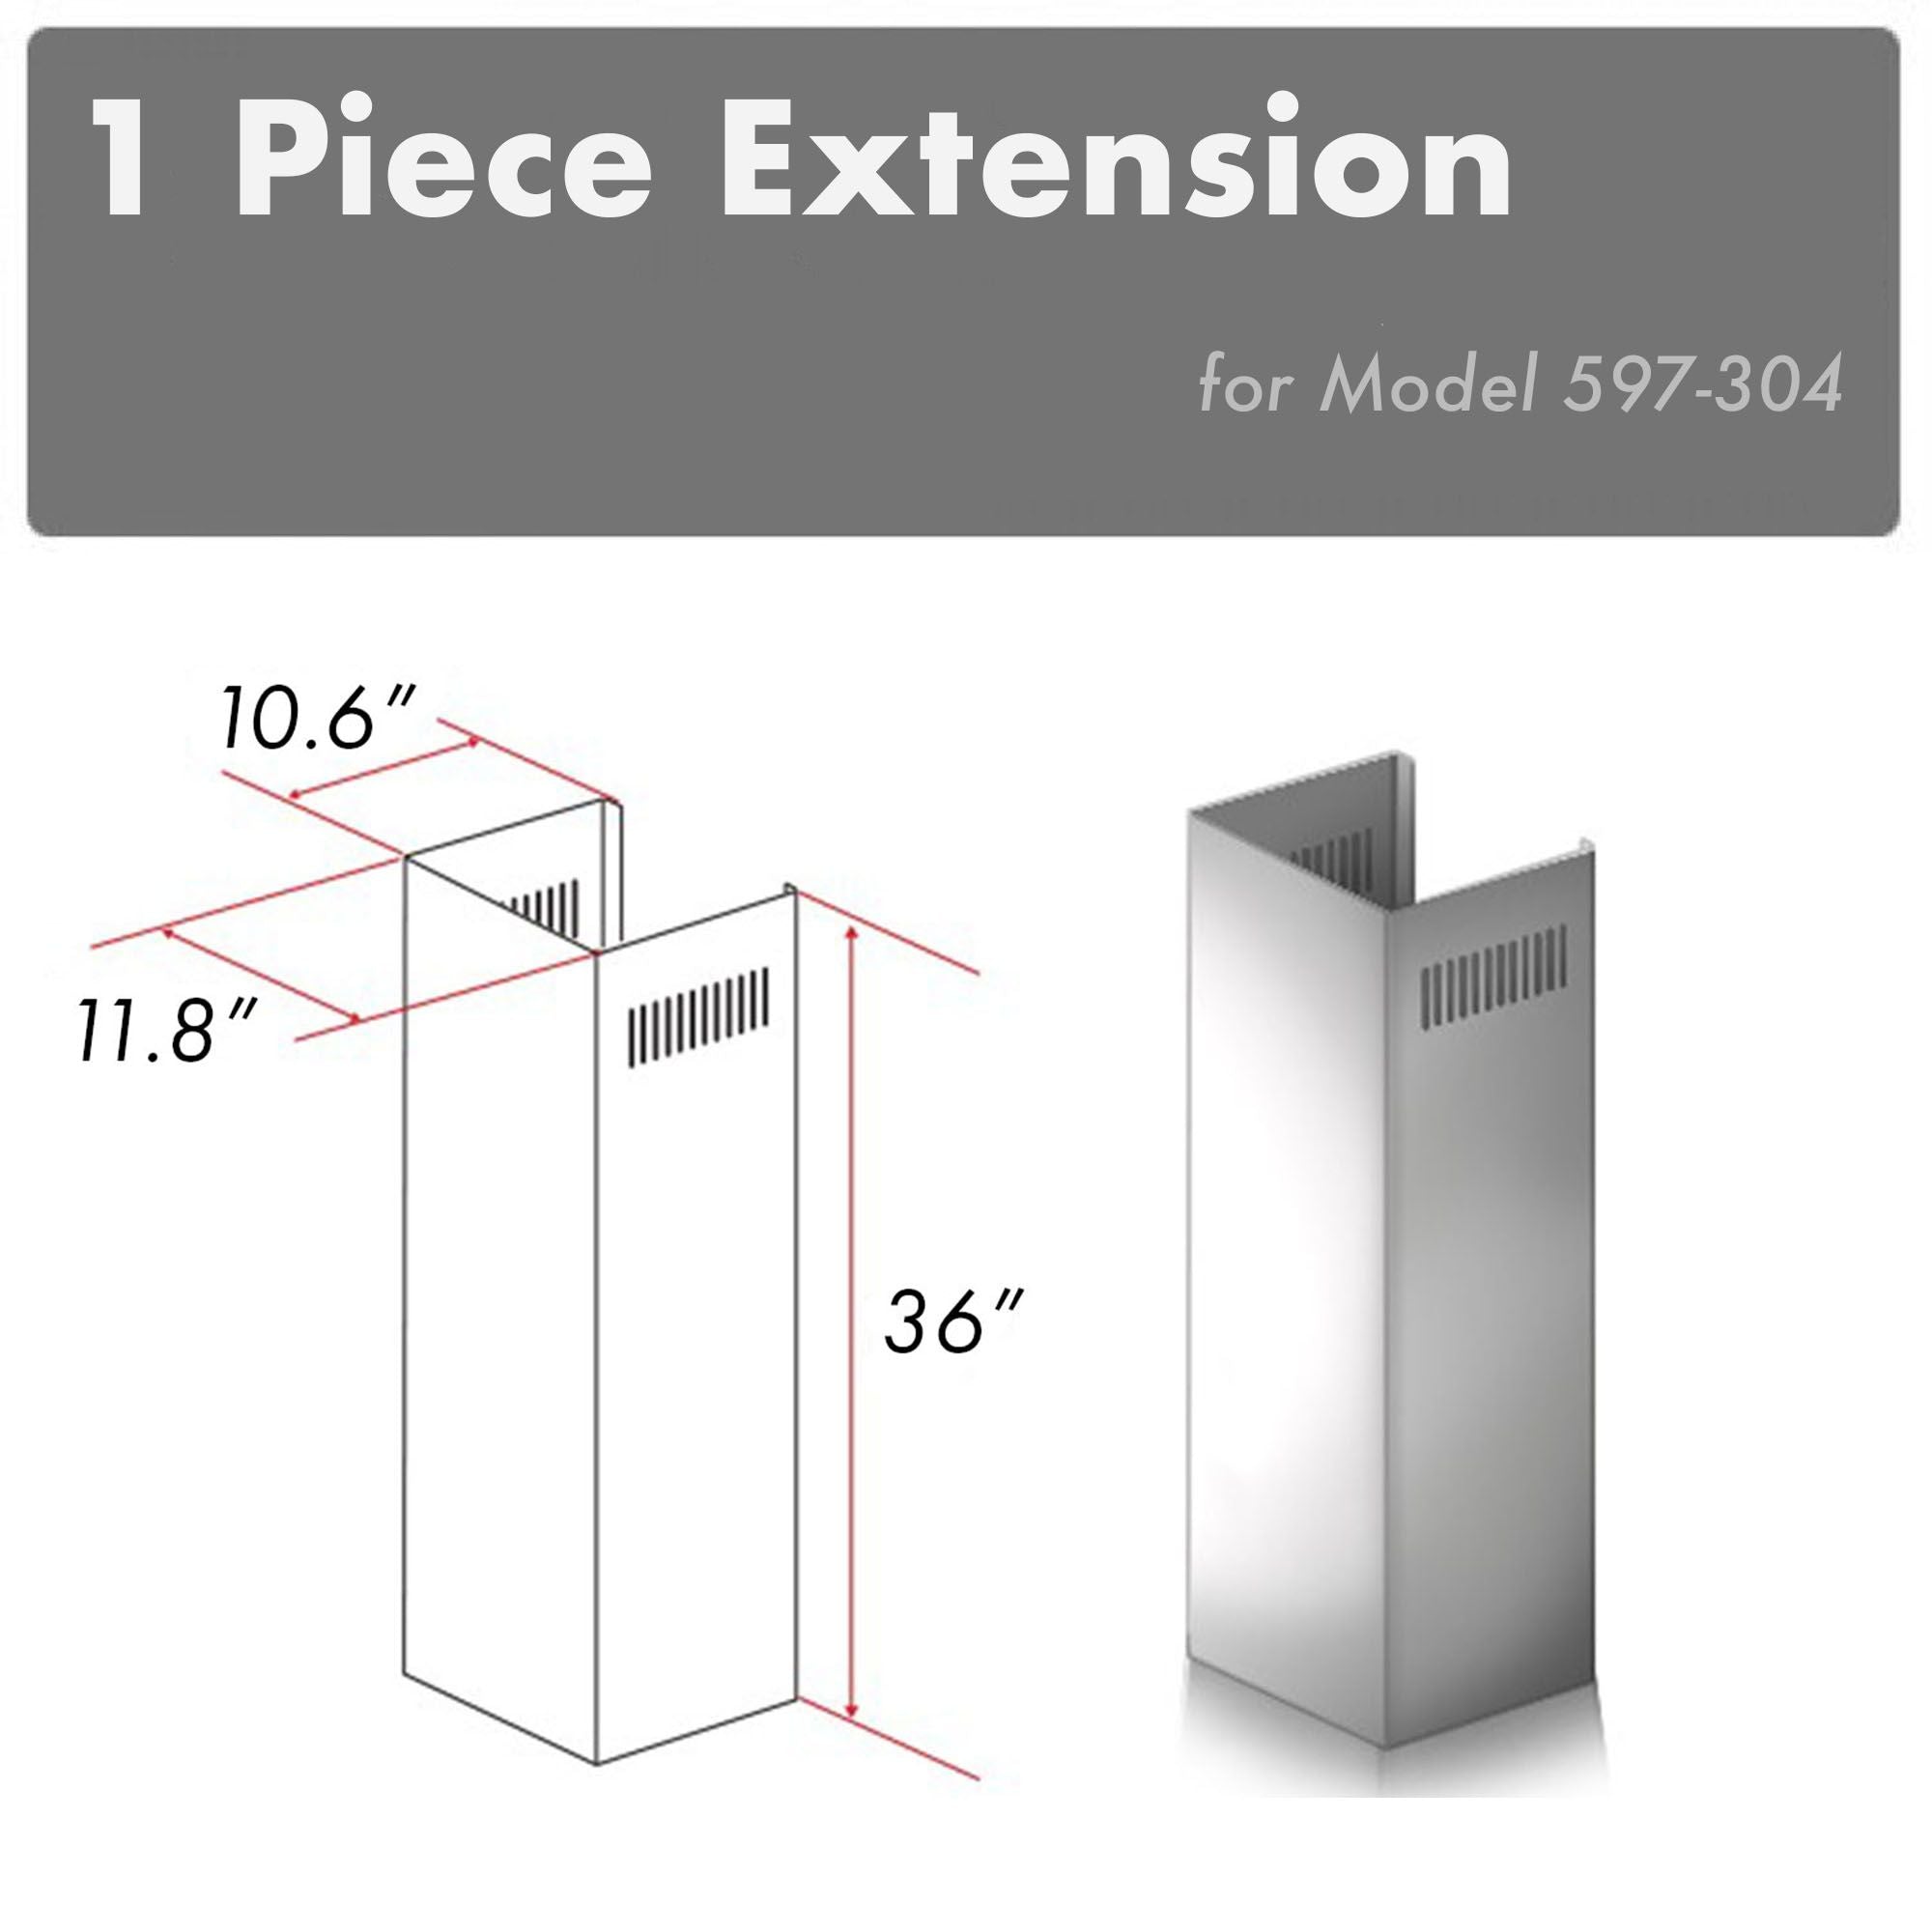 ZLINE 1-36 in. Chimney Extension for 9 ft. to 10 ft. Ceilings (1PCEXT-597-304)